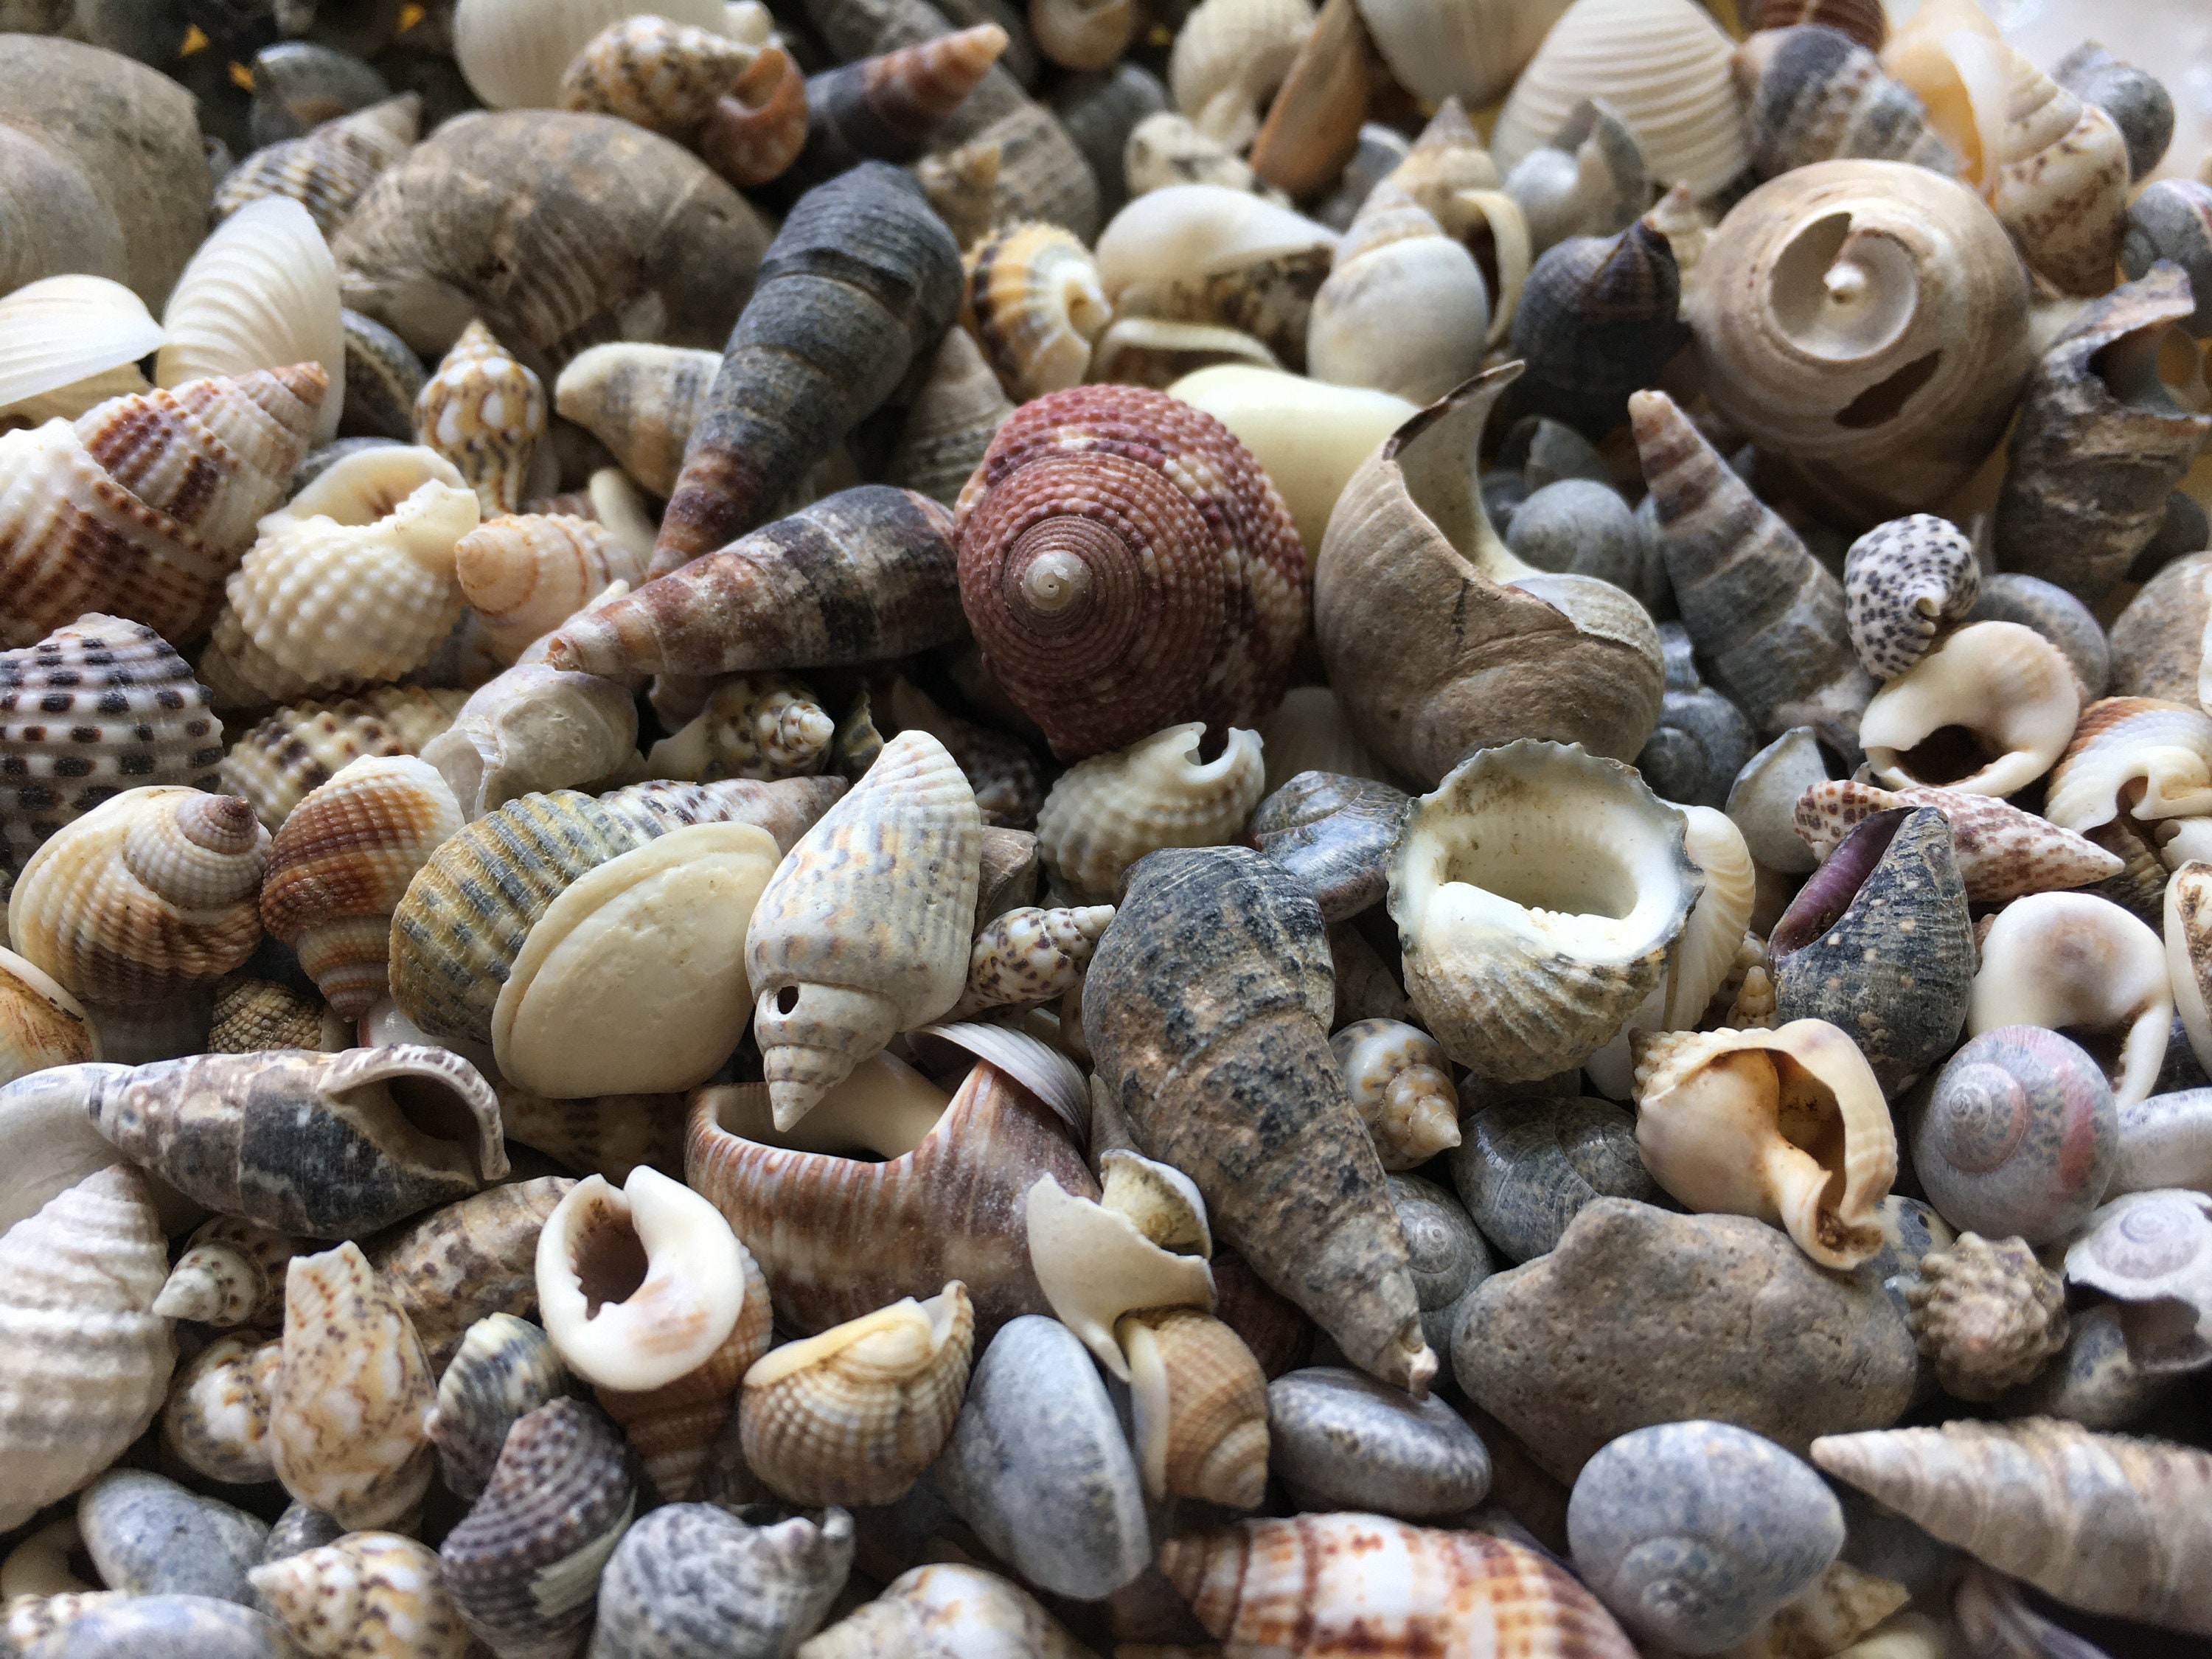 Mix Ocean Shells. Magnificent Beach Shells. Decor for Home, Boat, Aquariums  and More. Natural Beauty From the Sea. 